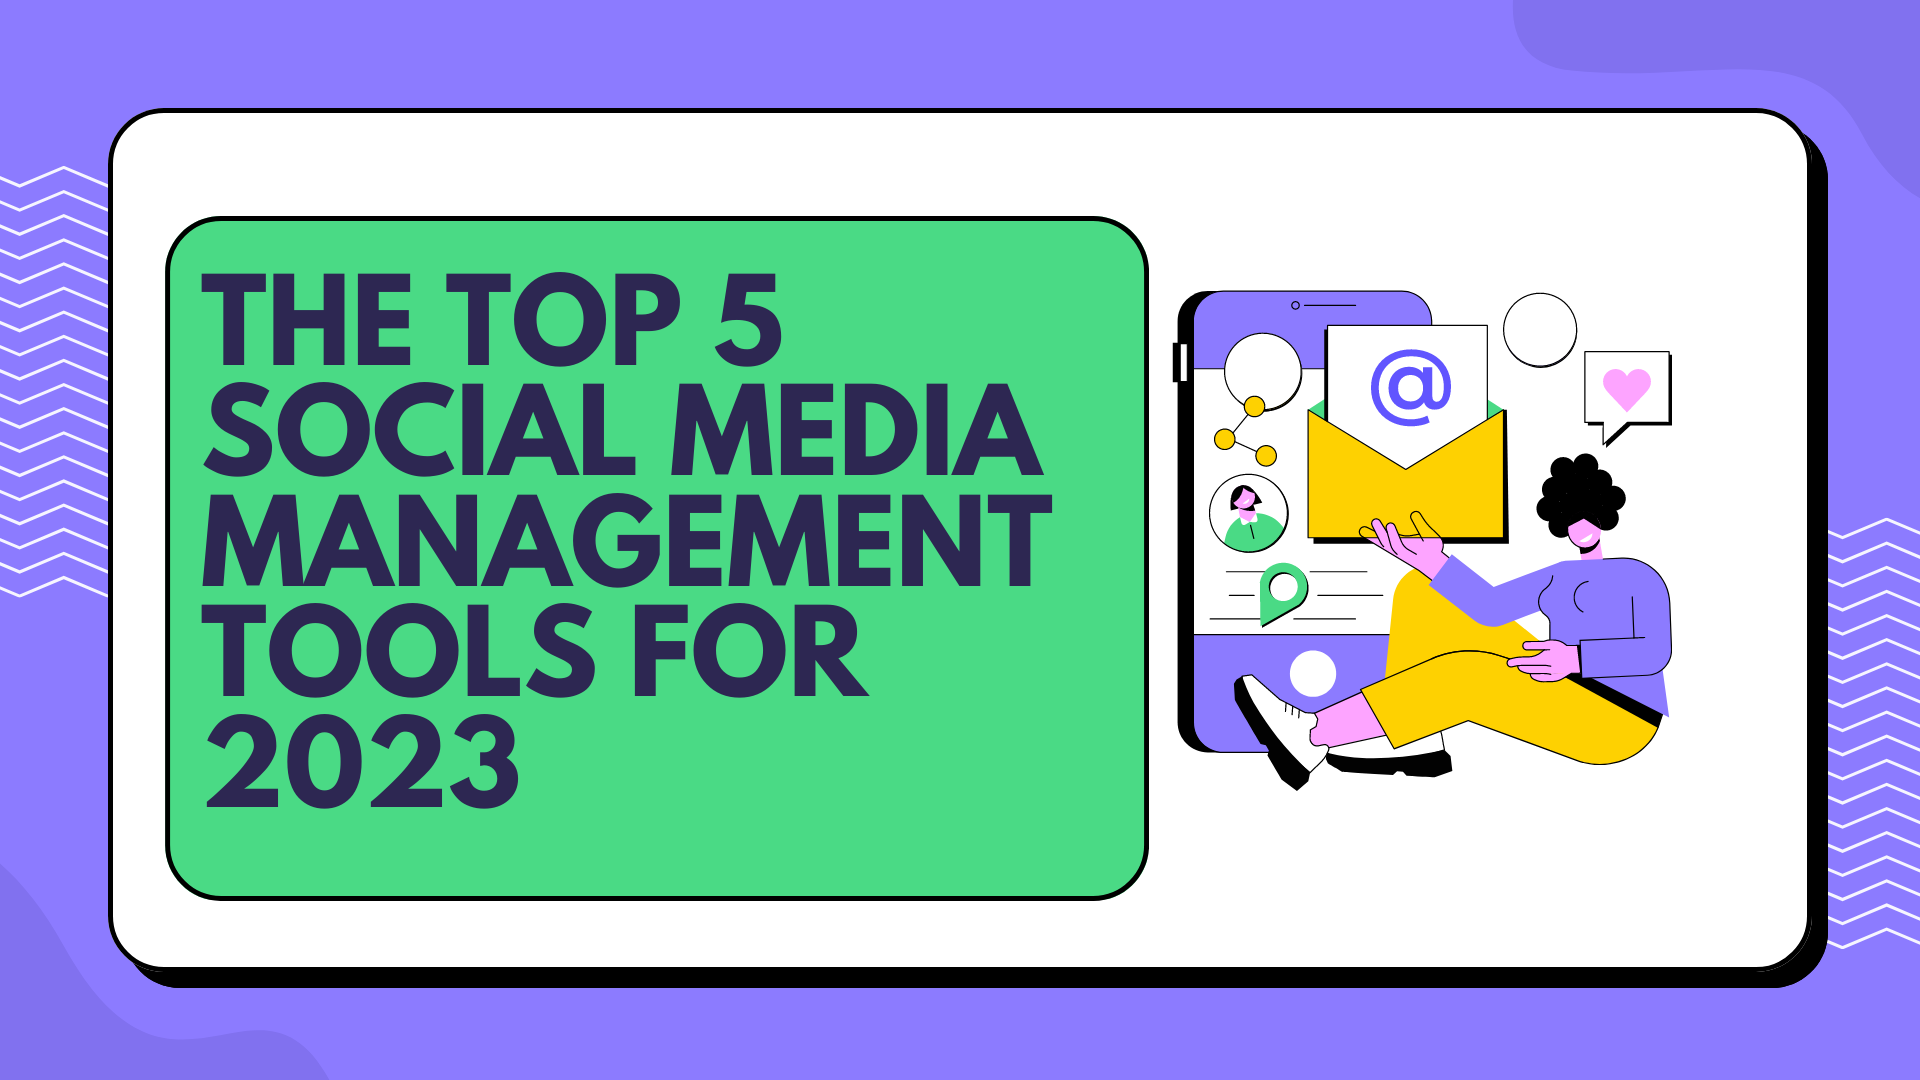 The Top 5 Social Media Management Tools for 2023